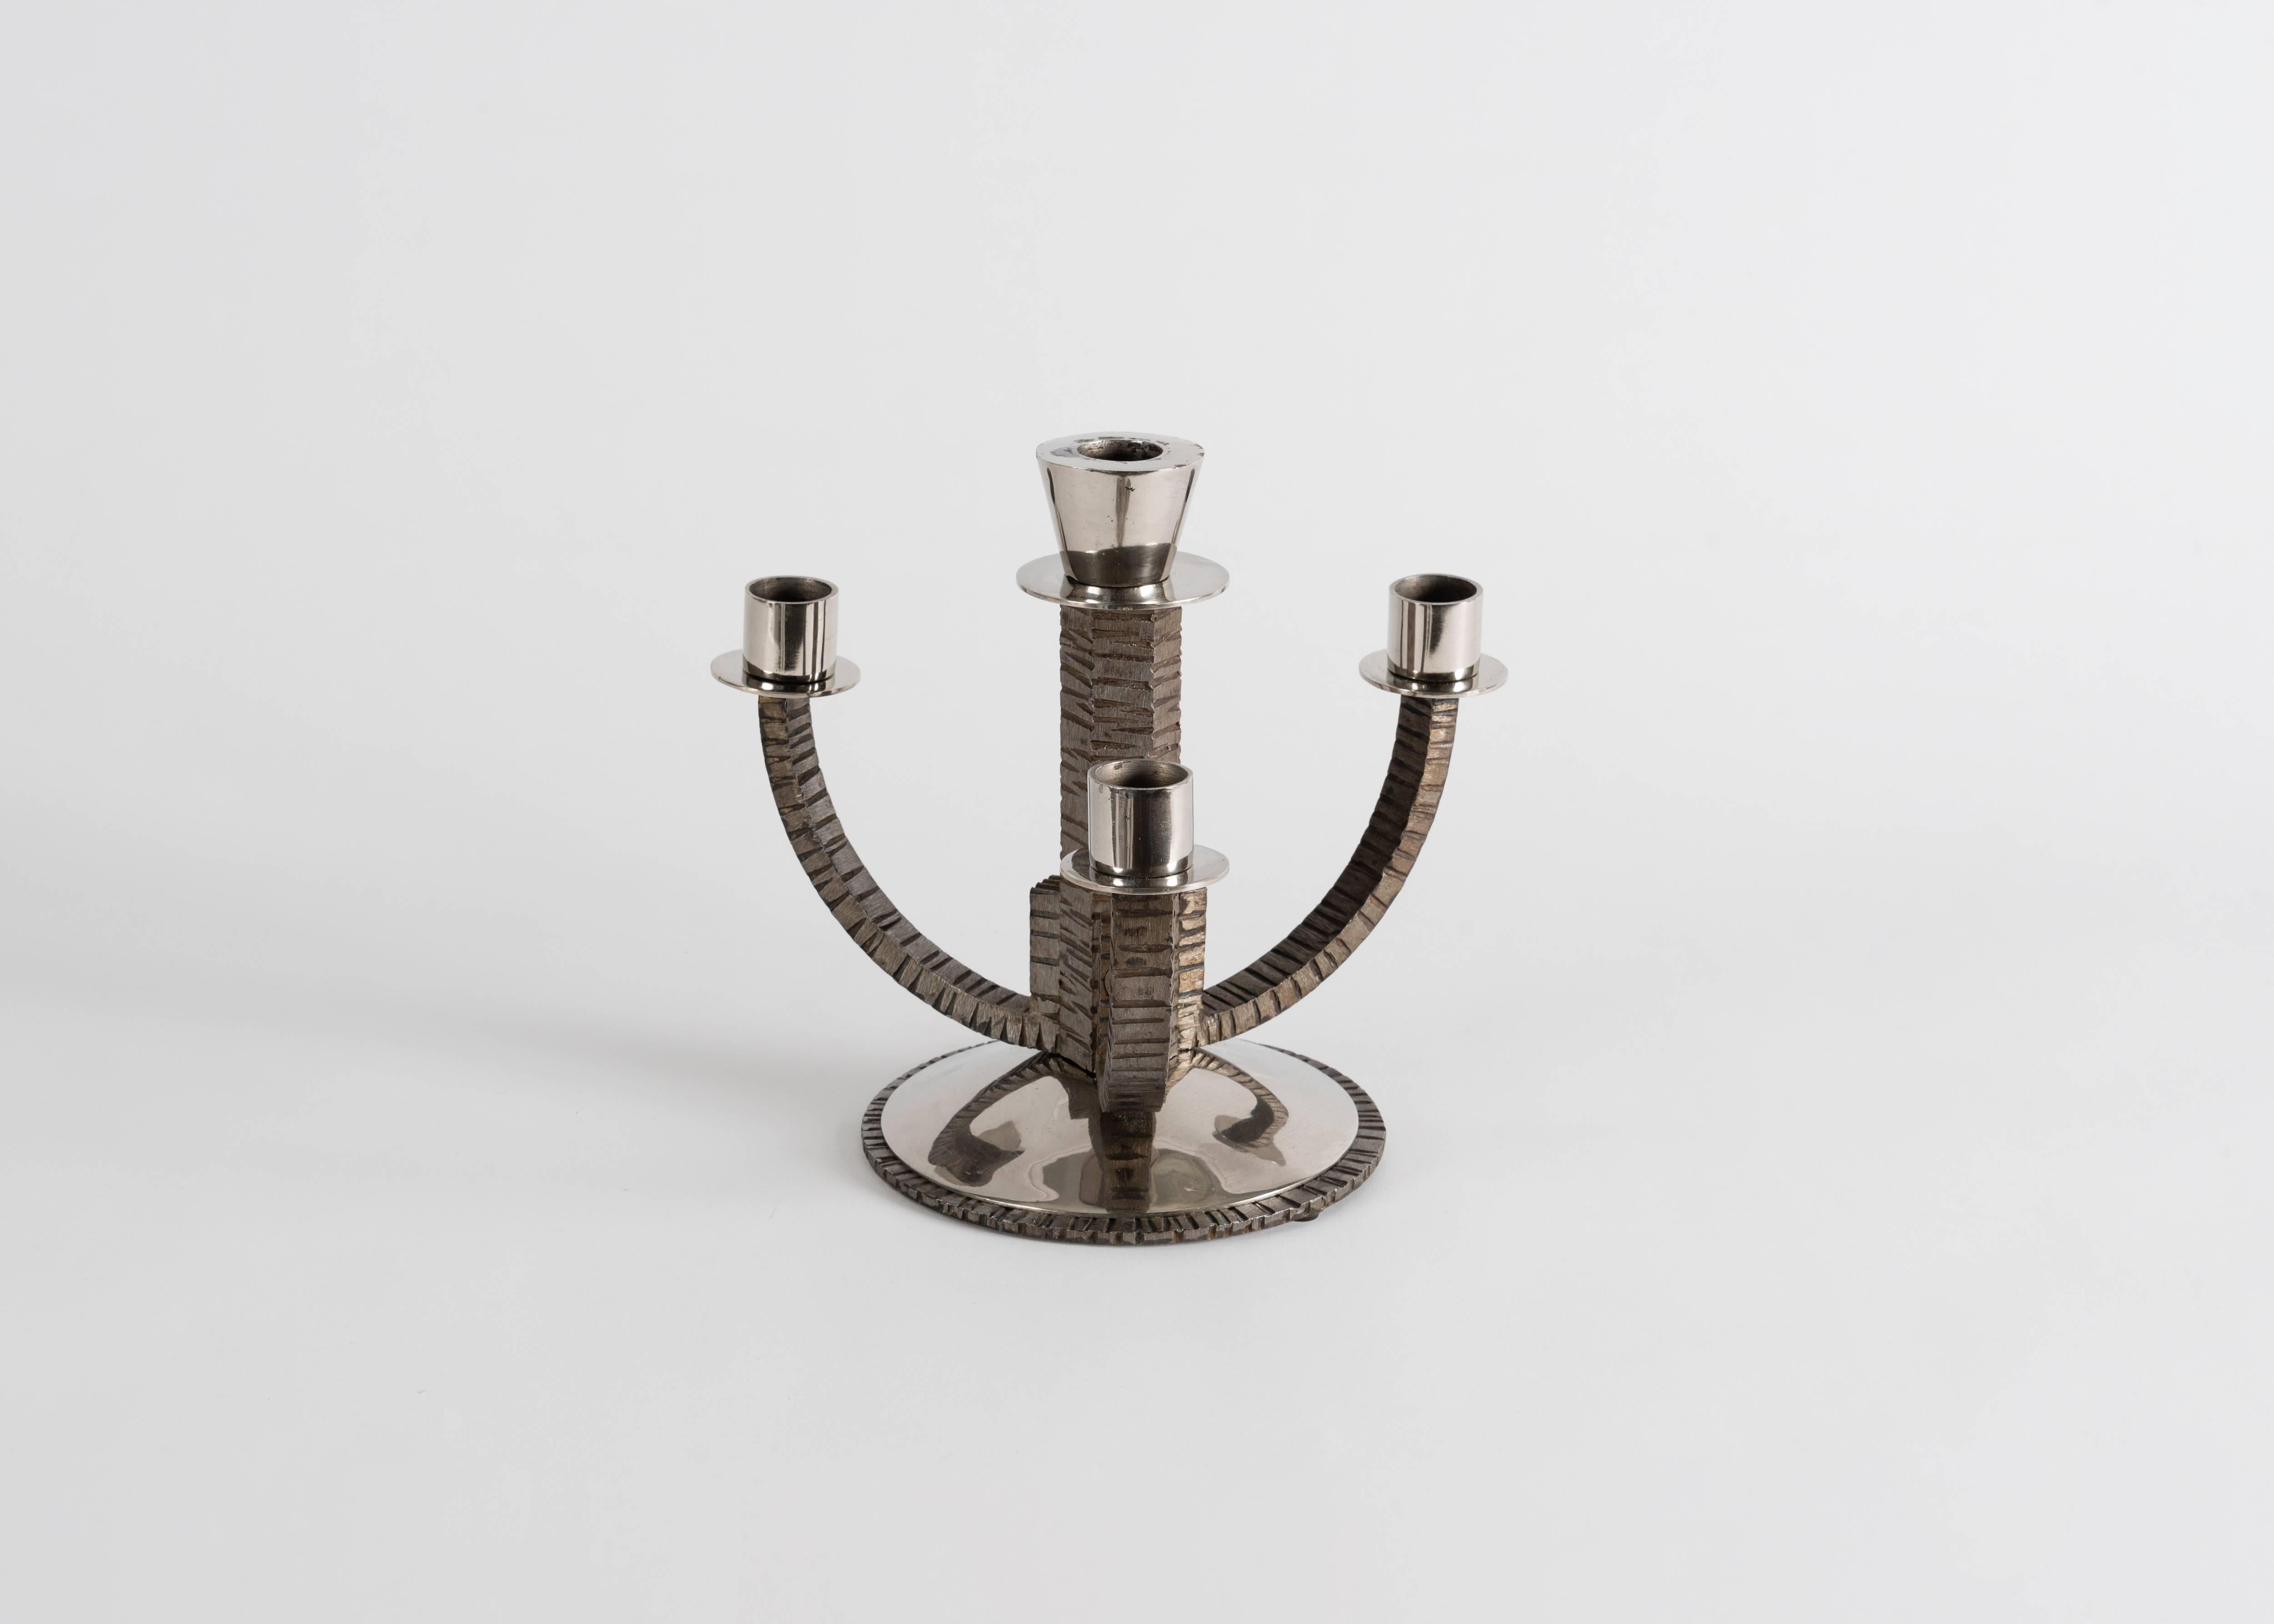 This elegant pair of candlesticks, in a remarkably textured hand-worked steel, have four arms apiece: three curved, and one central--straight, and taller than the others.